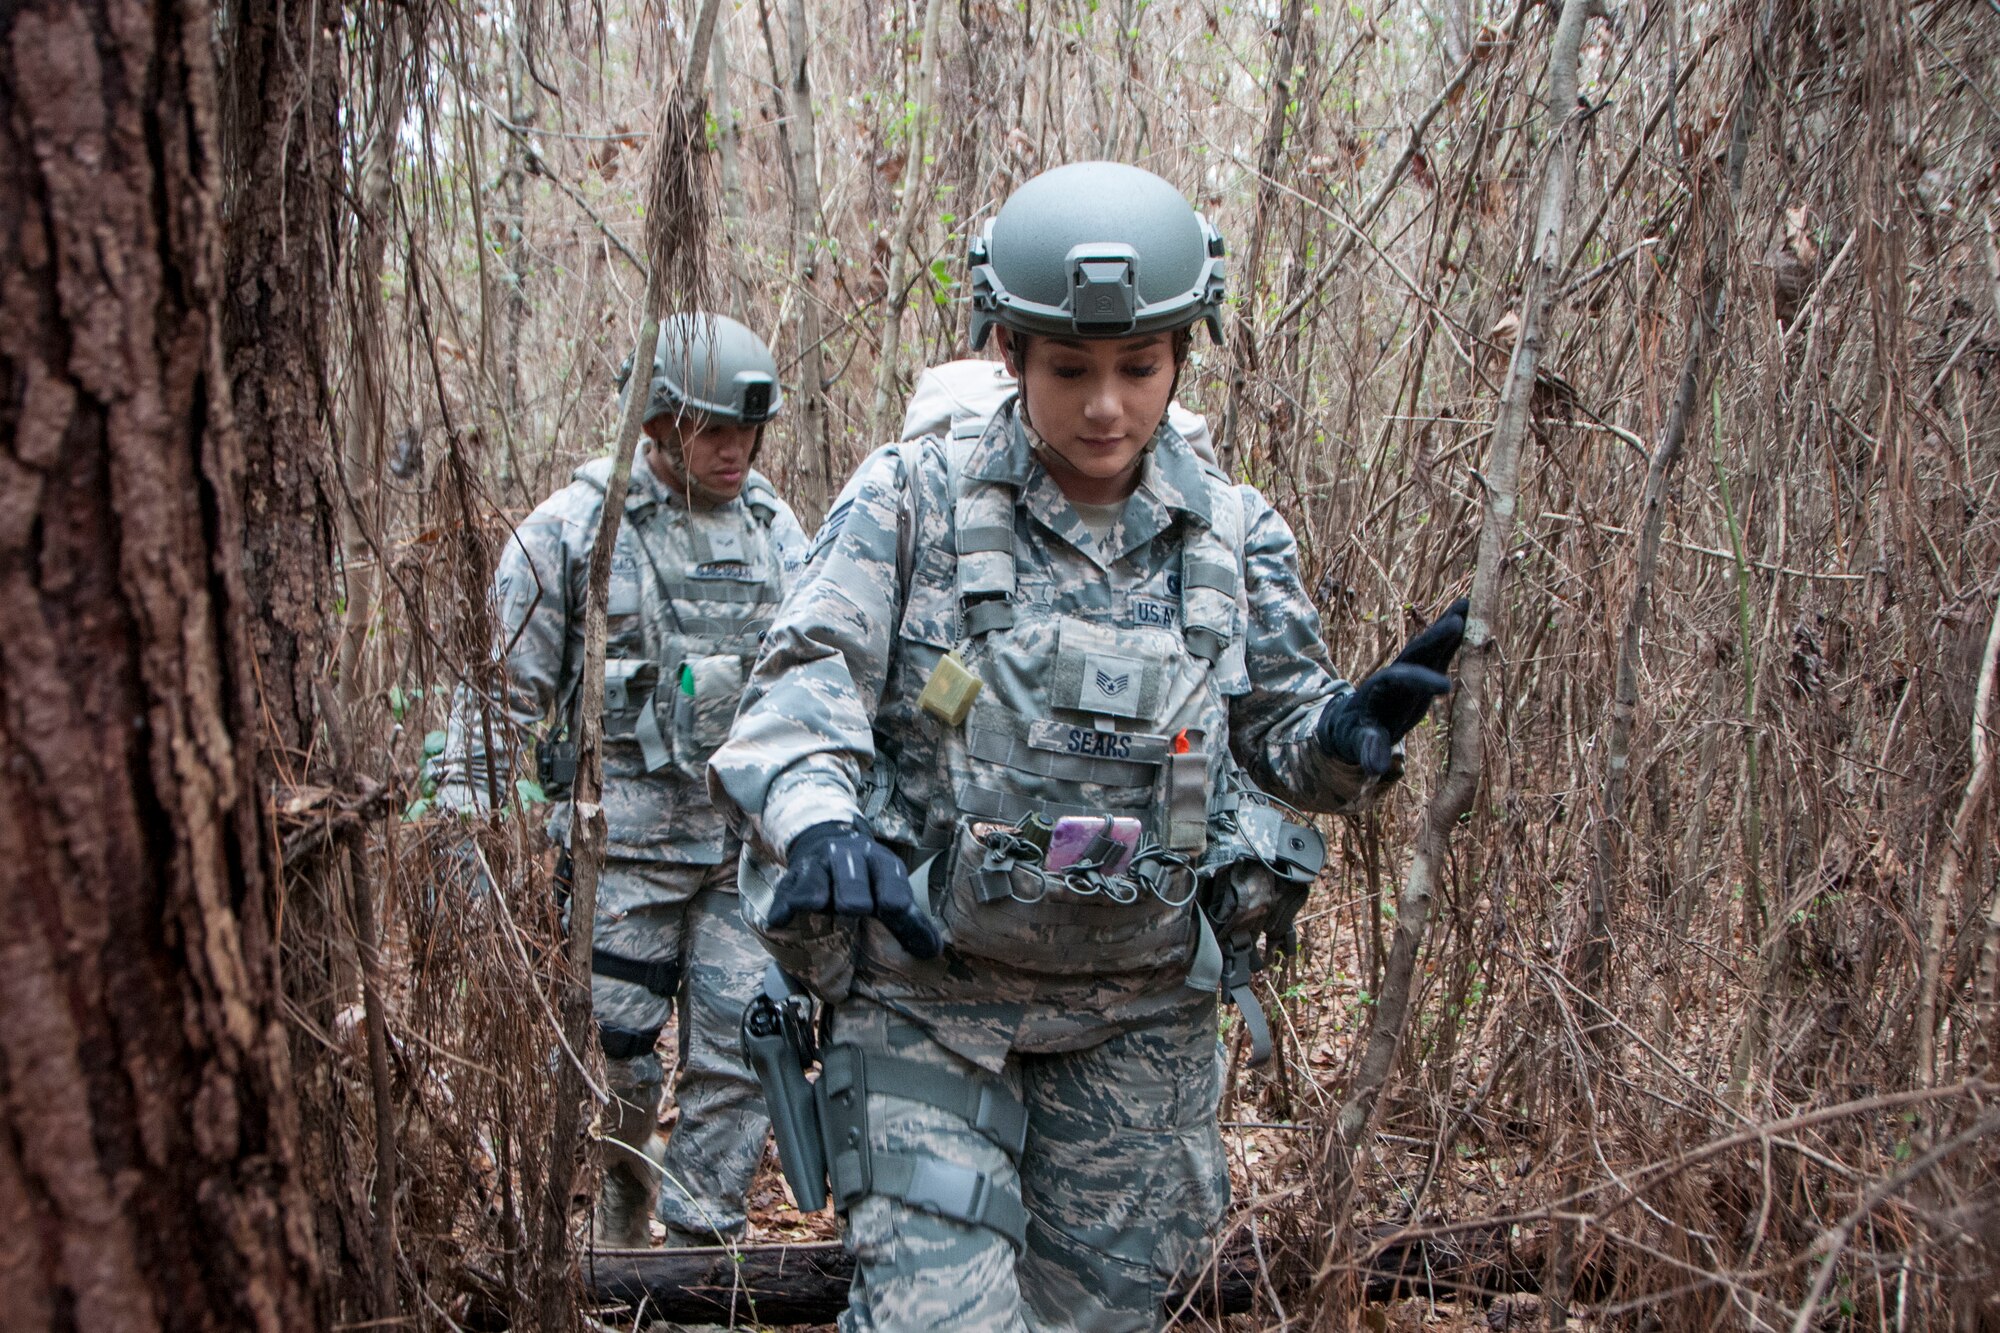 Staff Sgt. Sashalynn Sears (center) and Airman 1st Class Juanito Gacusan, 154th Security Forces Squadron fireteam member, searches the forest as part simulated search and rescue sweep as part of Patriot South Feb. 14, 2018, at Camp Shelby, Mississippi.